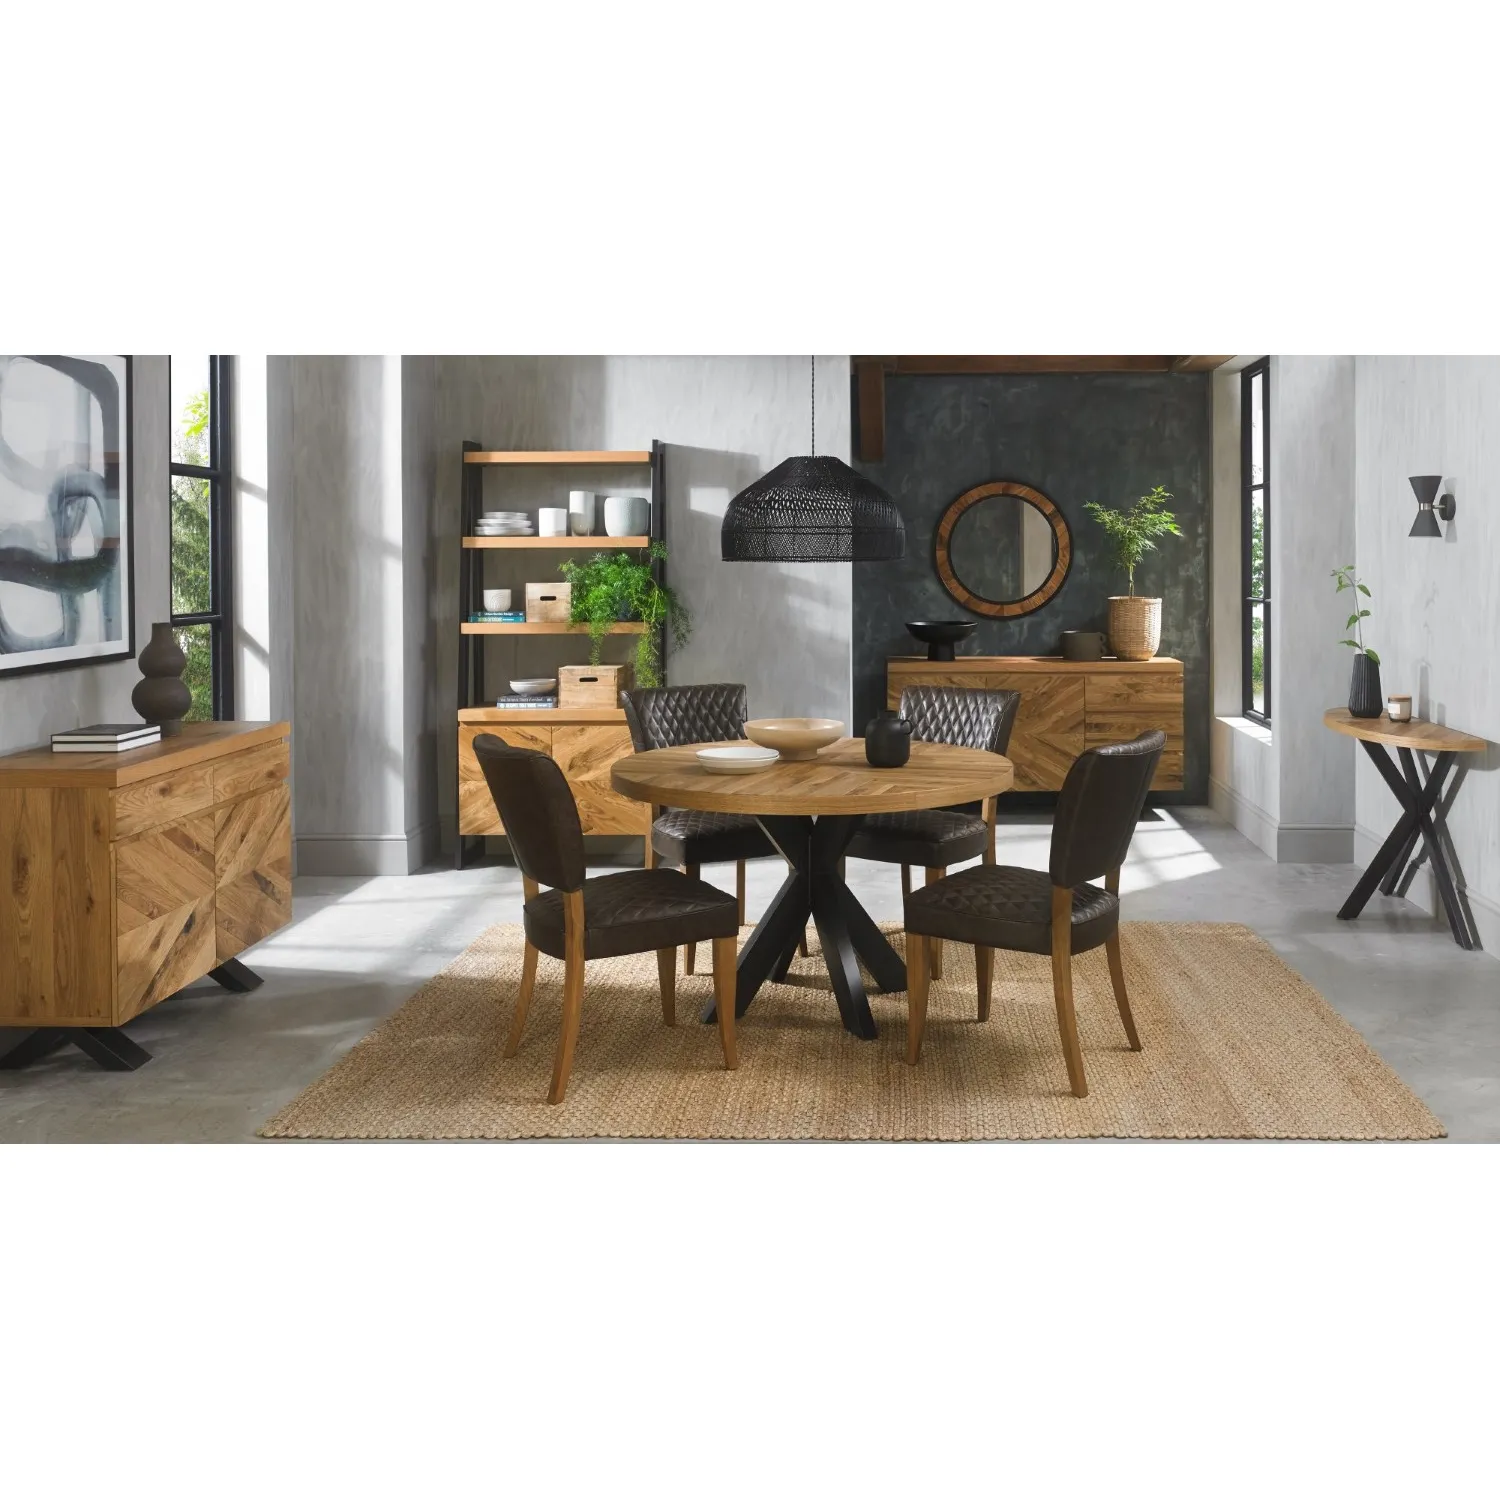 Rustic Oak Round Dining Table Set 4 Grey Leather Chairs